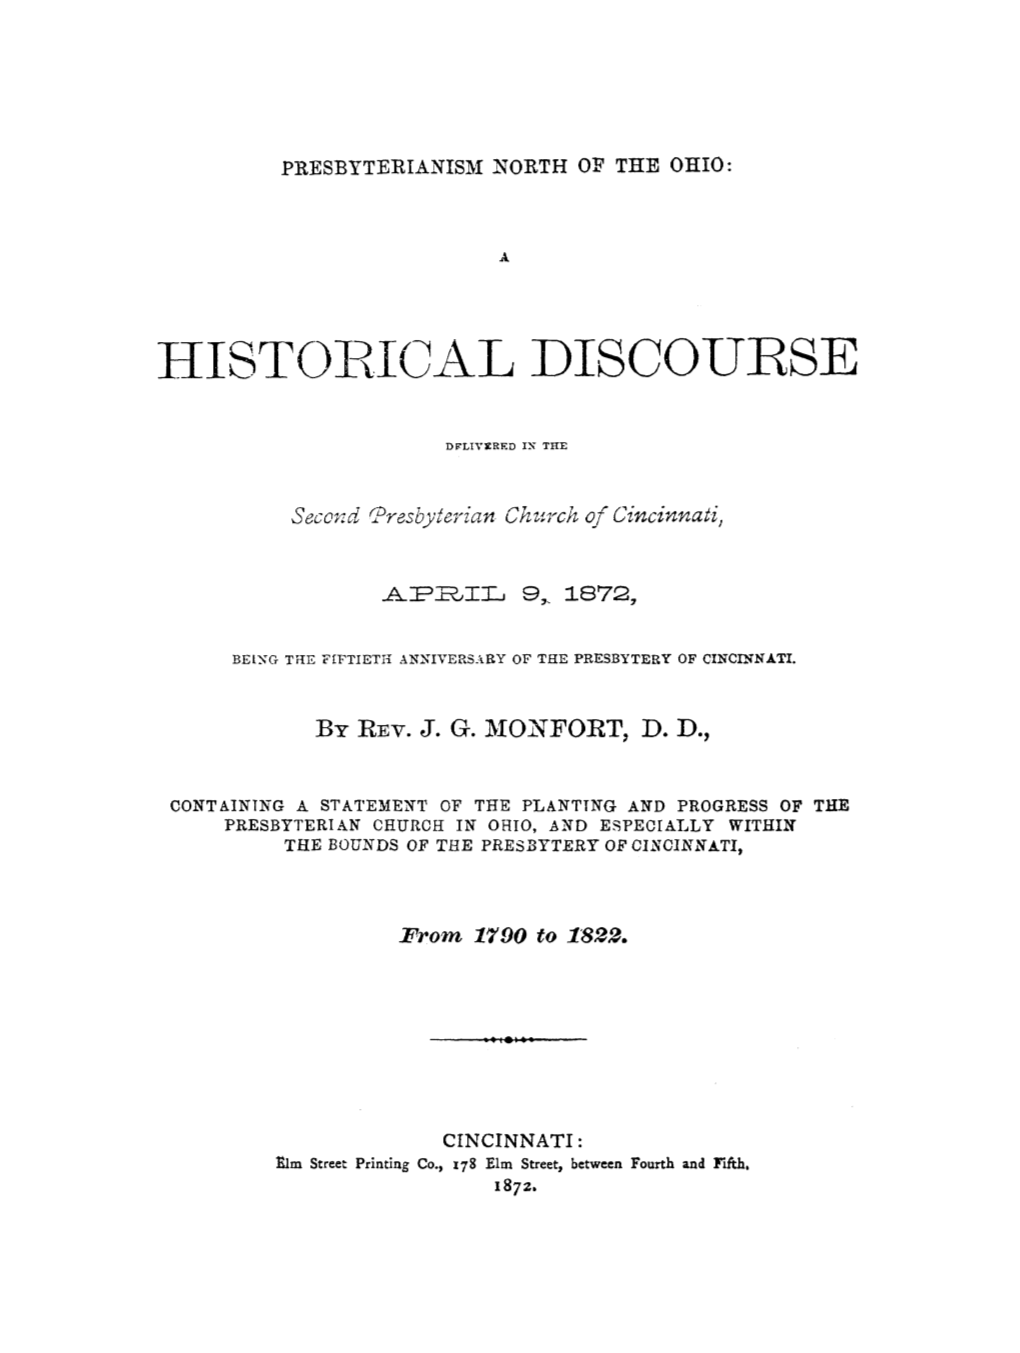 Hist011ical Discourse